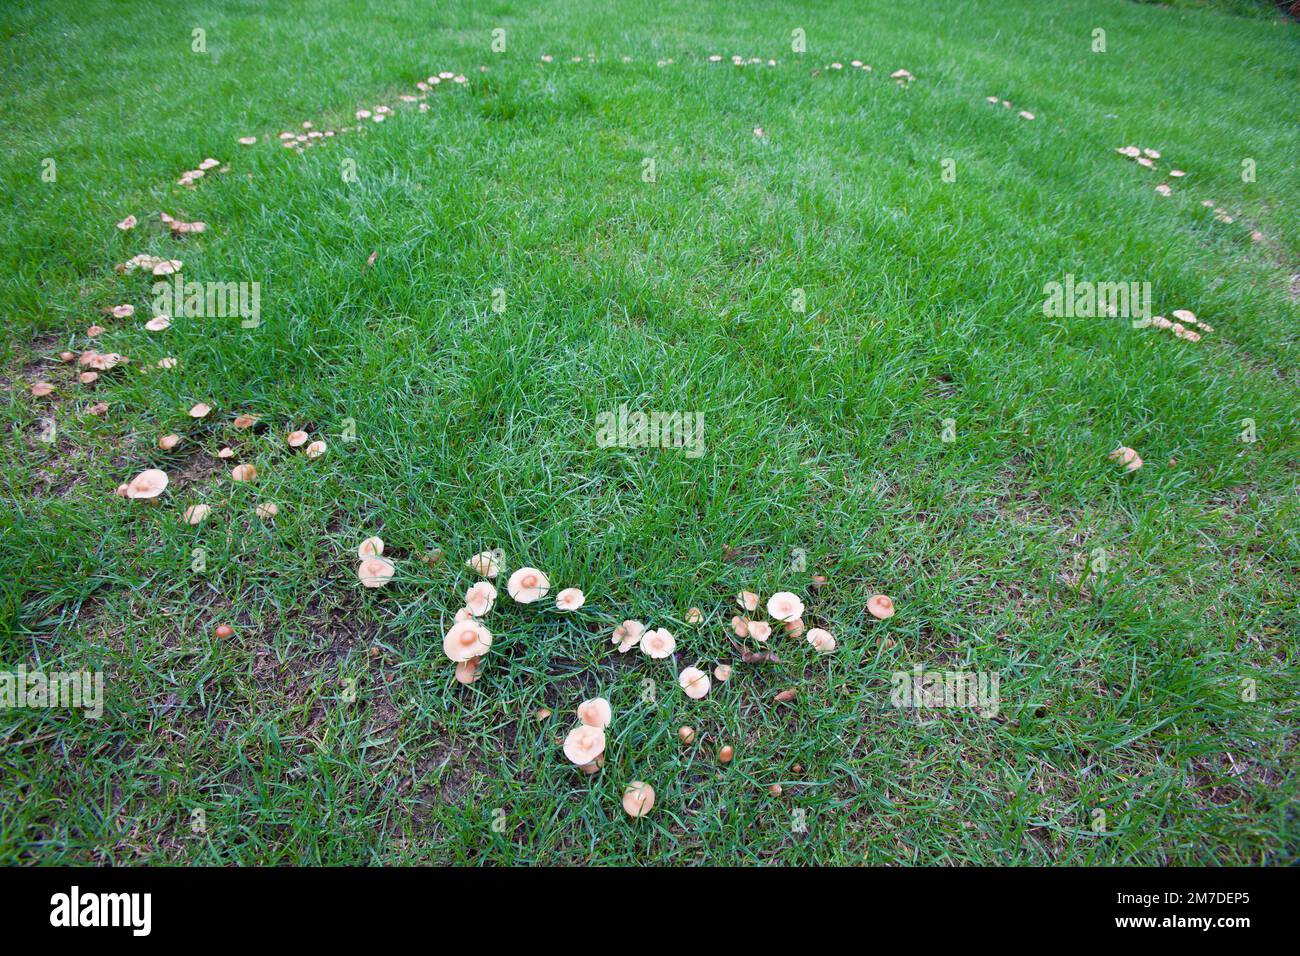 A small fairy ring of mushrooms or toadstools in a field in the UK. Stock Photo